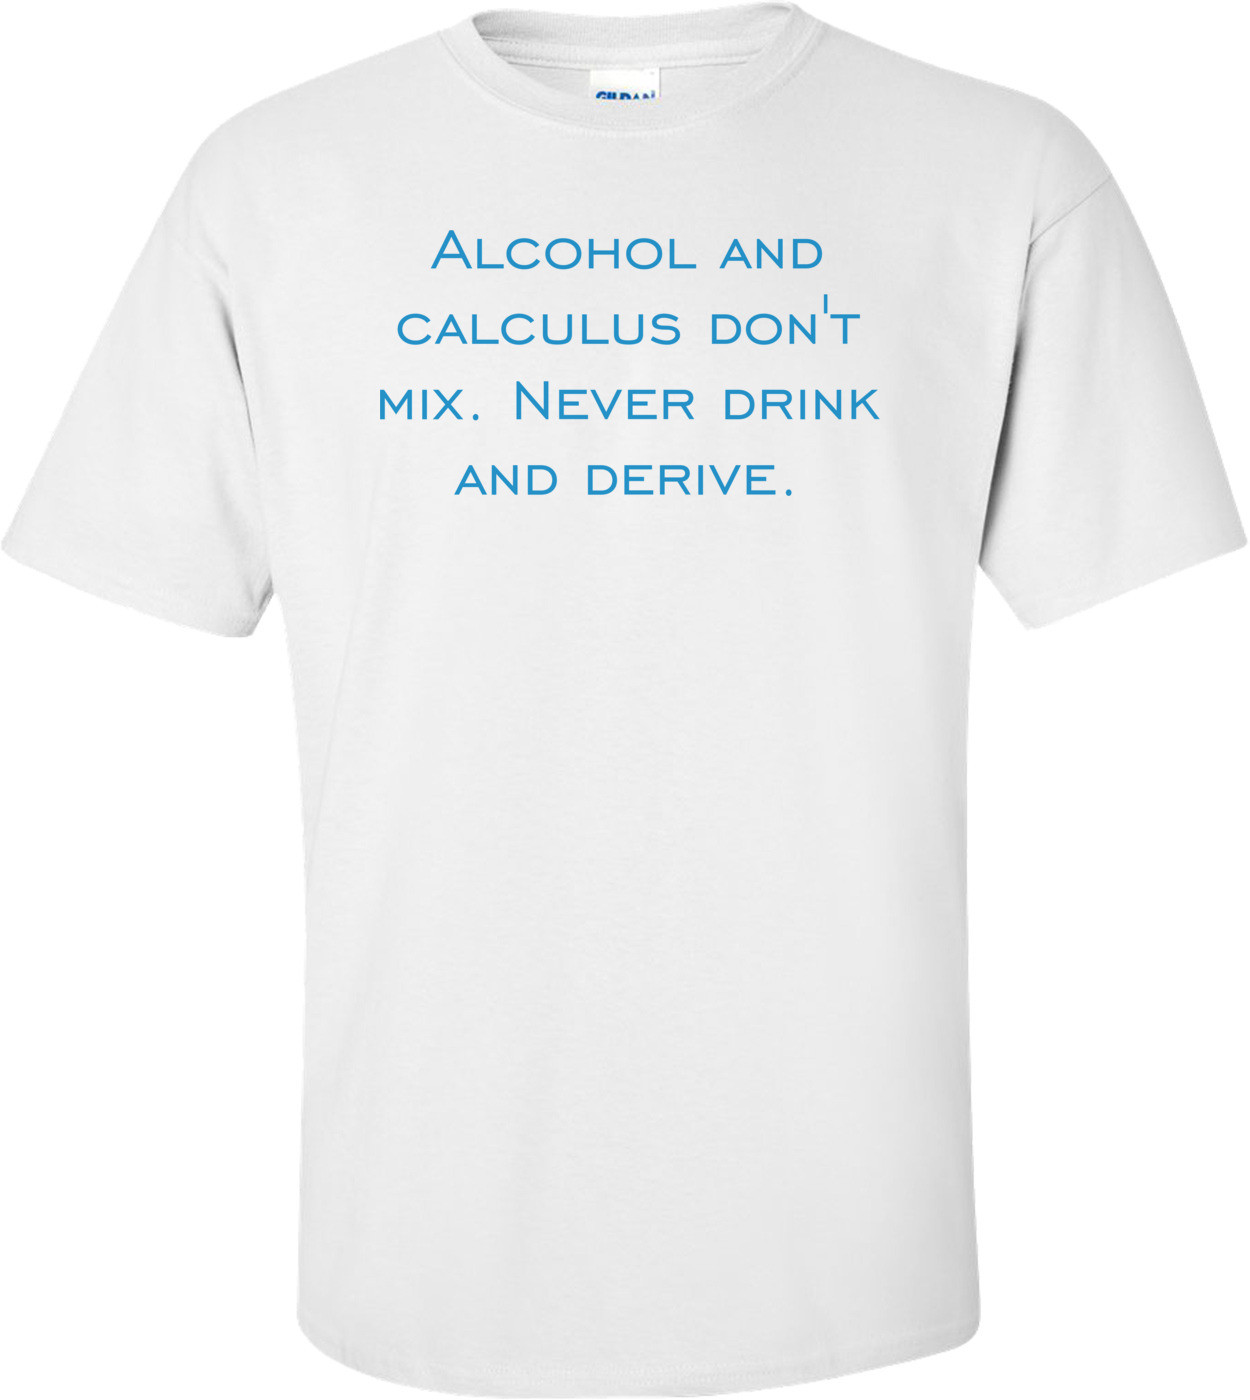 Alcohol and calculus don't mix. Never drink and derive.